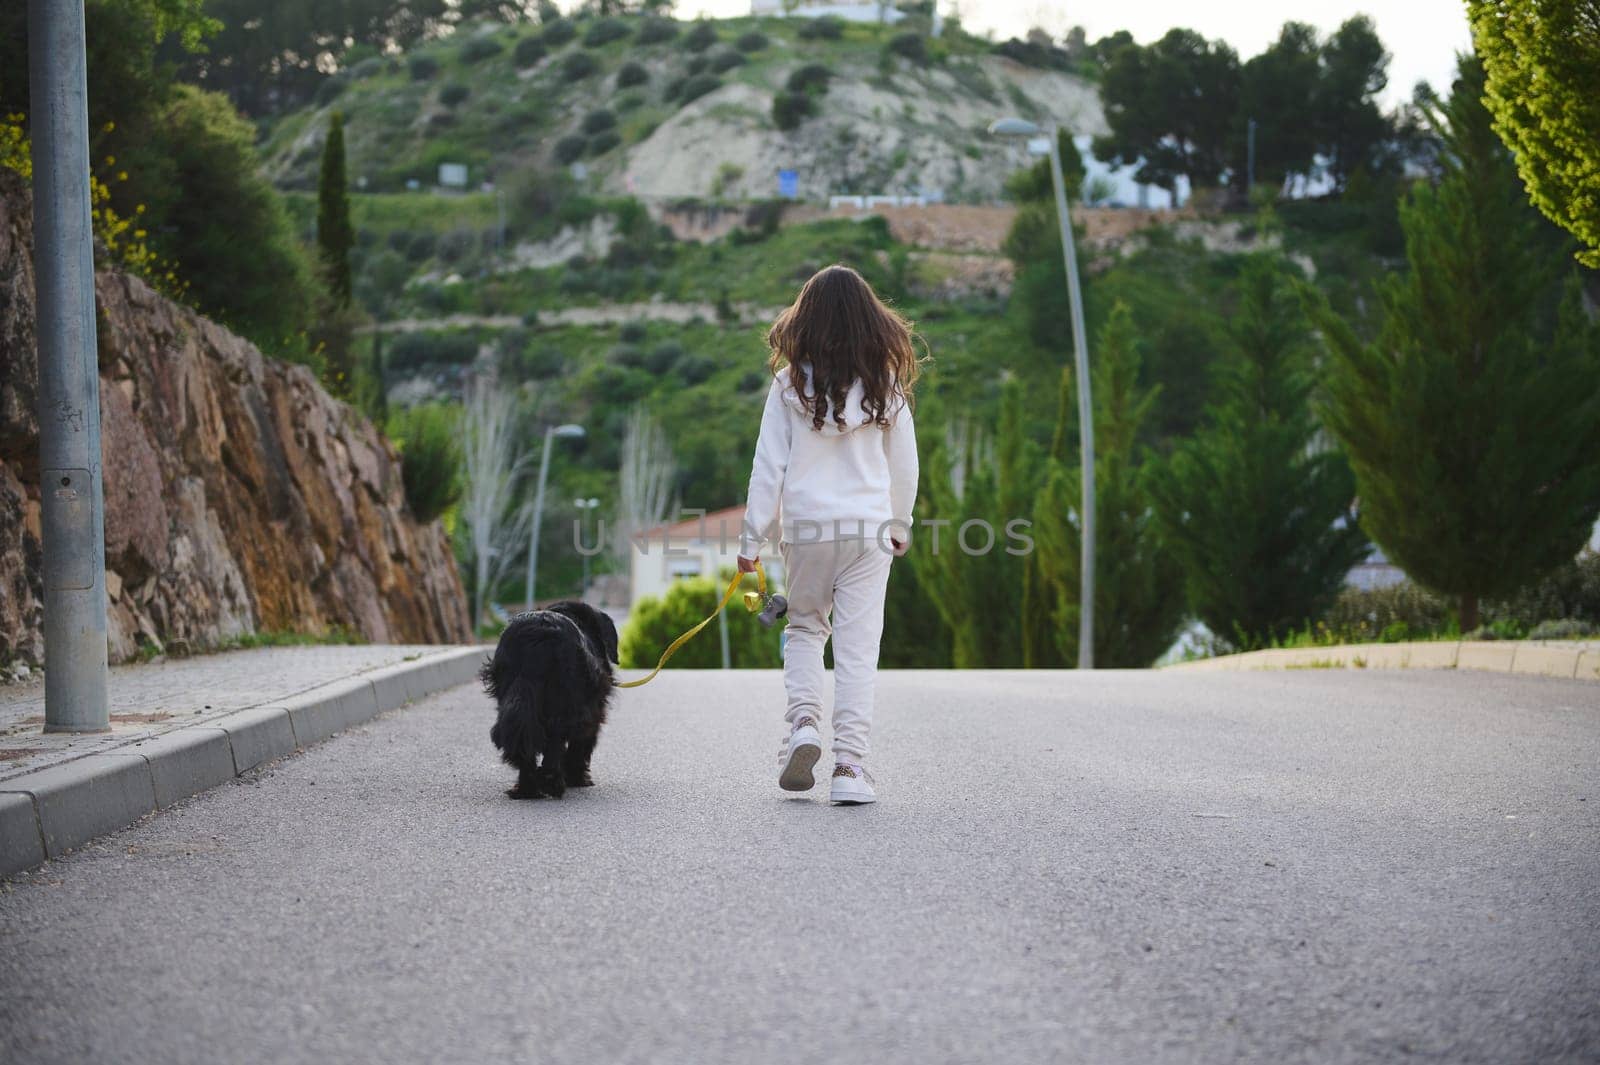 Rear view of adorable little kid girl in white sportswear,enjoying a walking with her dog on leash on the nature outdoors, against sunset sunbeams background. People, playing pets and nature concept by artgf